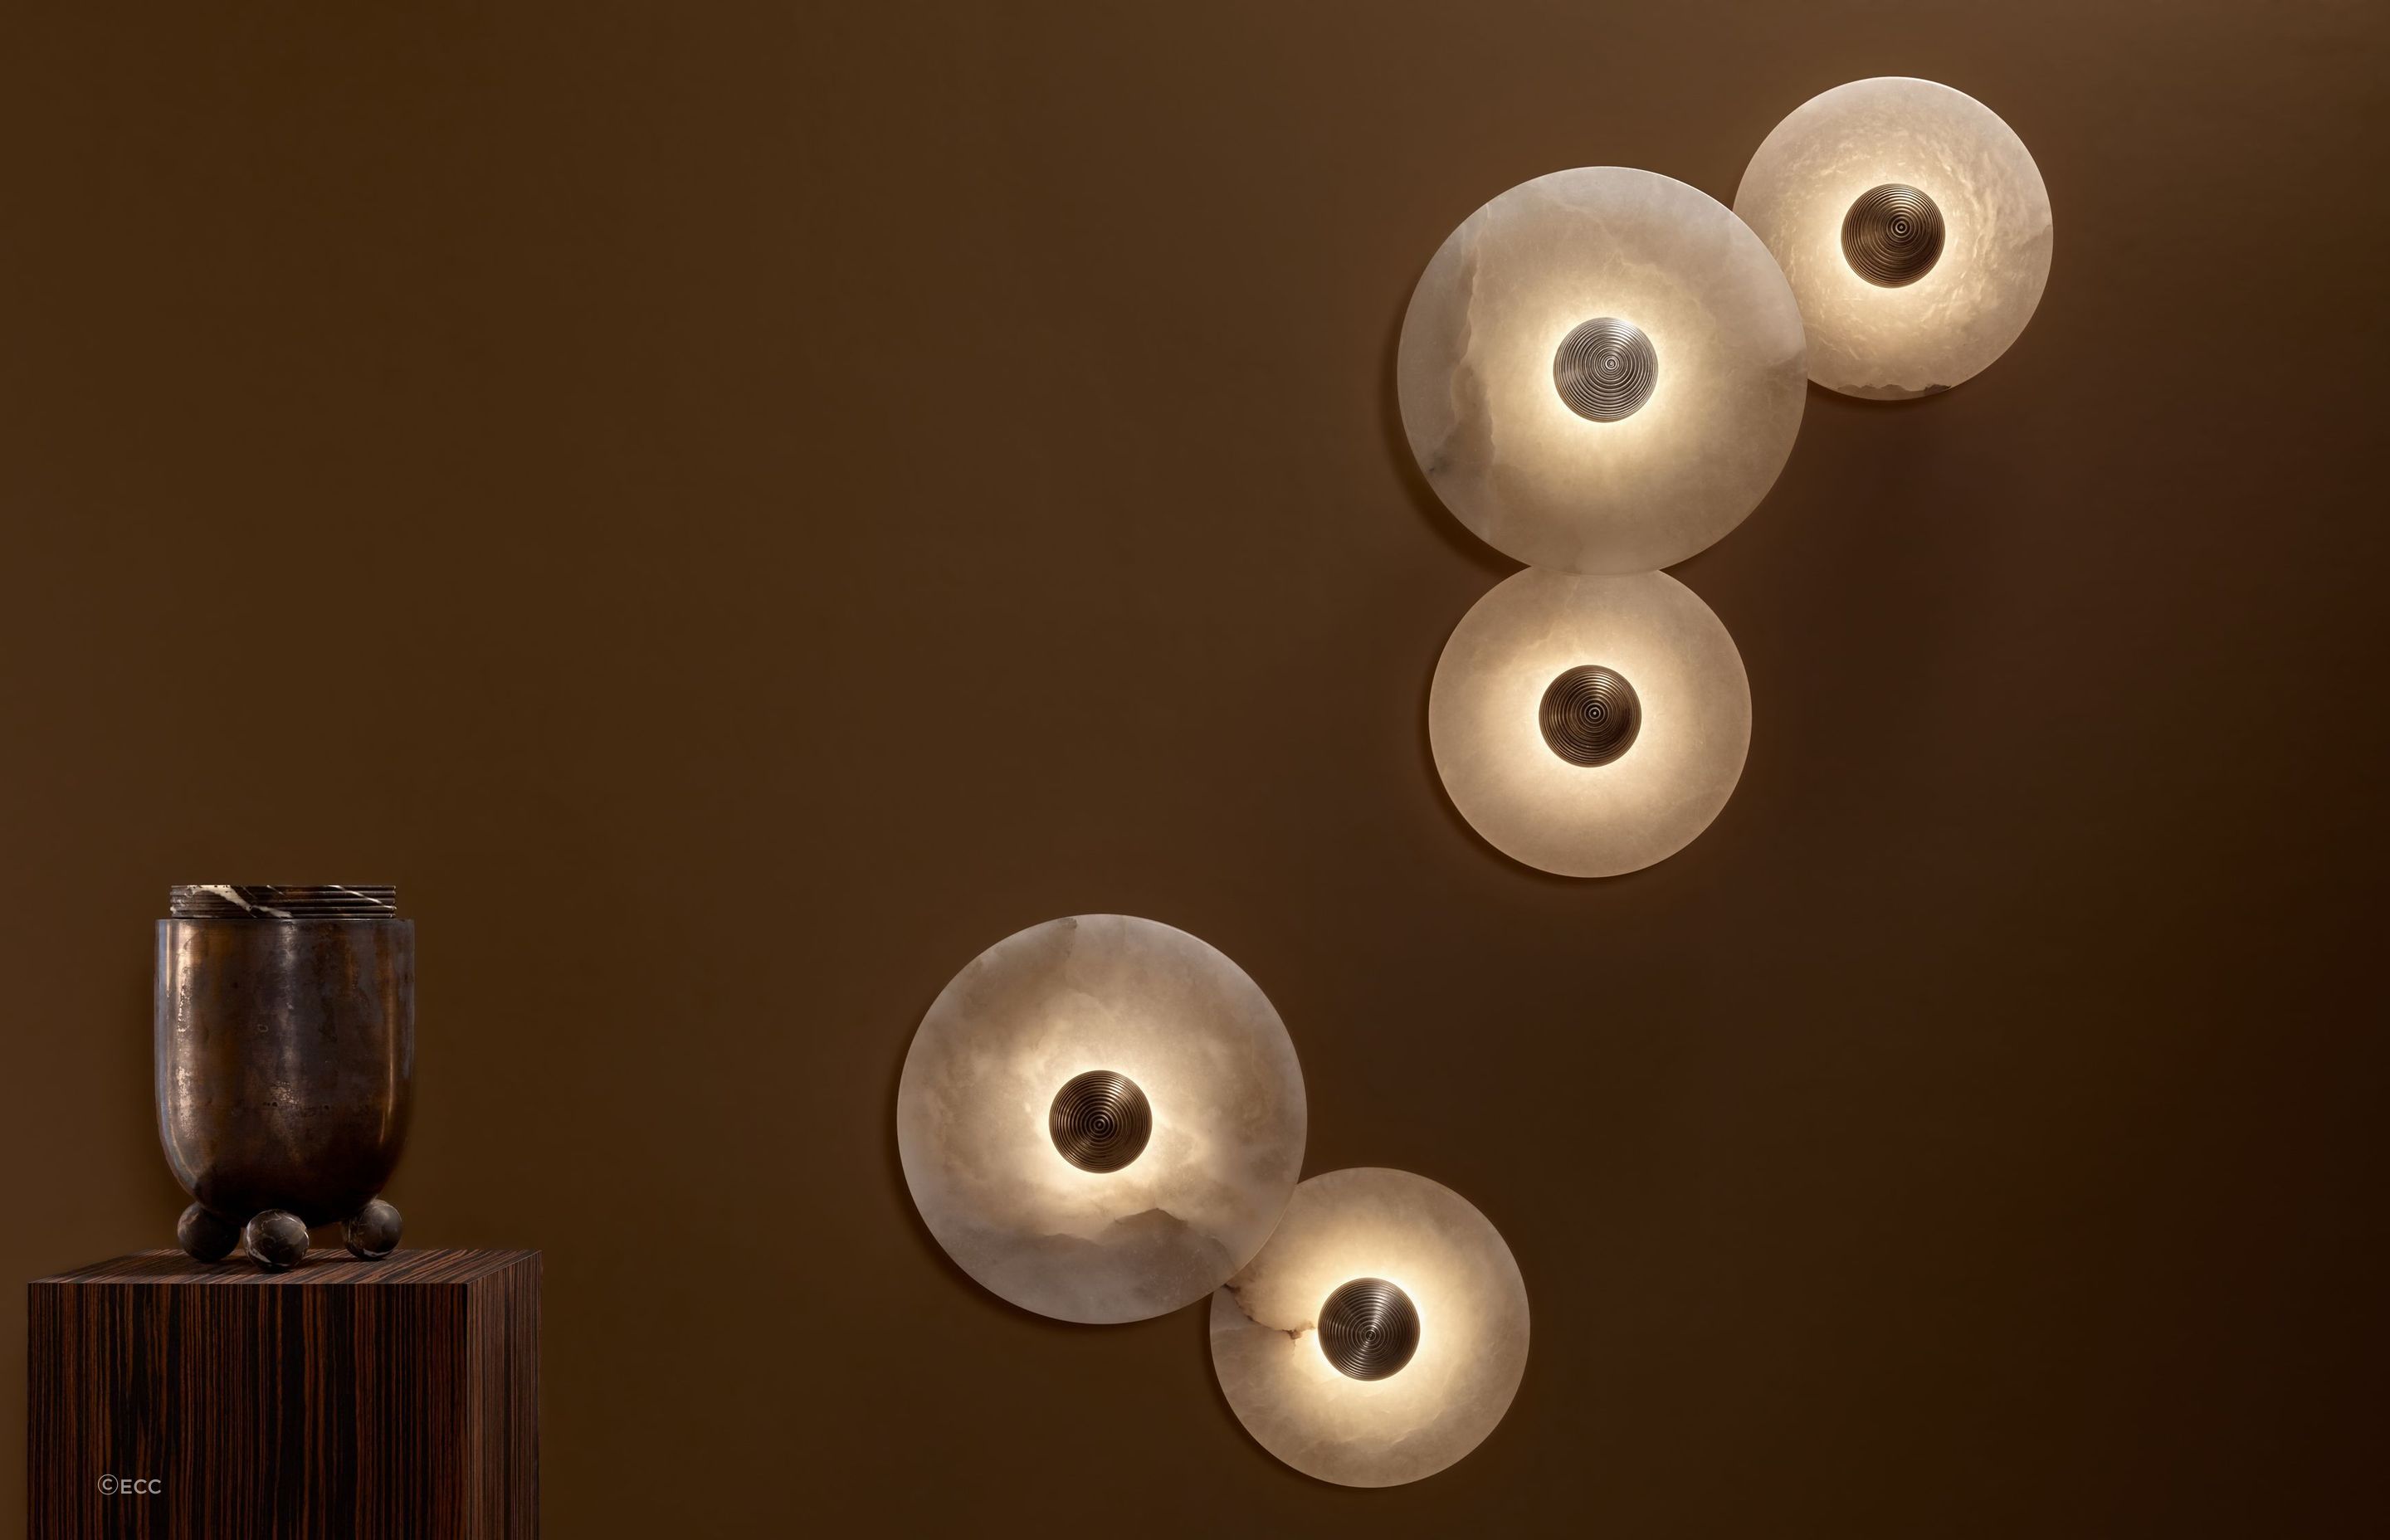 The Median Sconce Wall Light by Apparatus features a stone that glows from a hidden light source adding to its sense of wonder